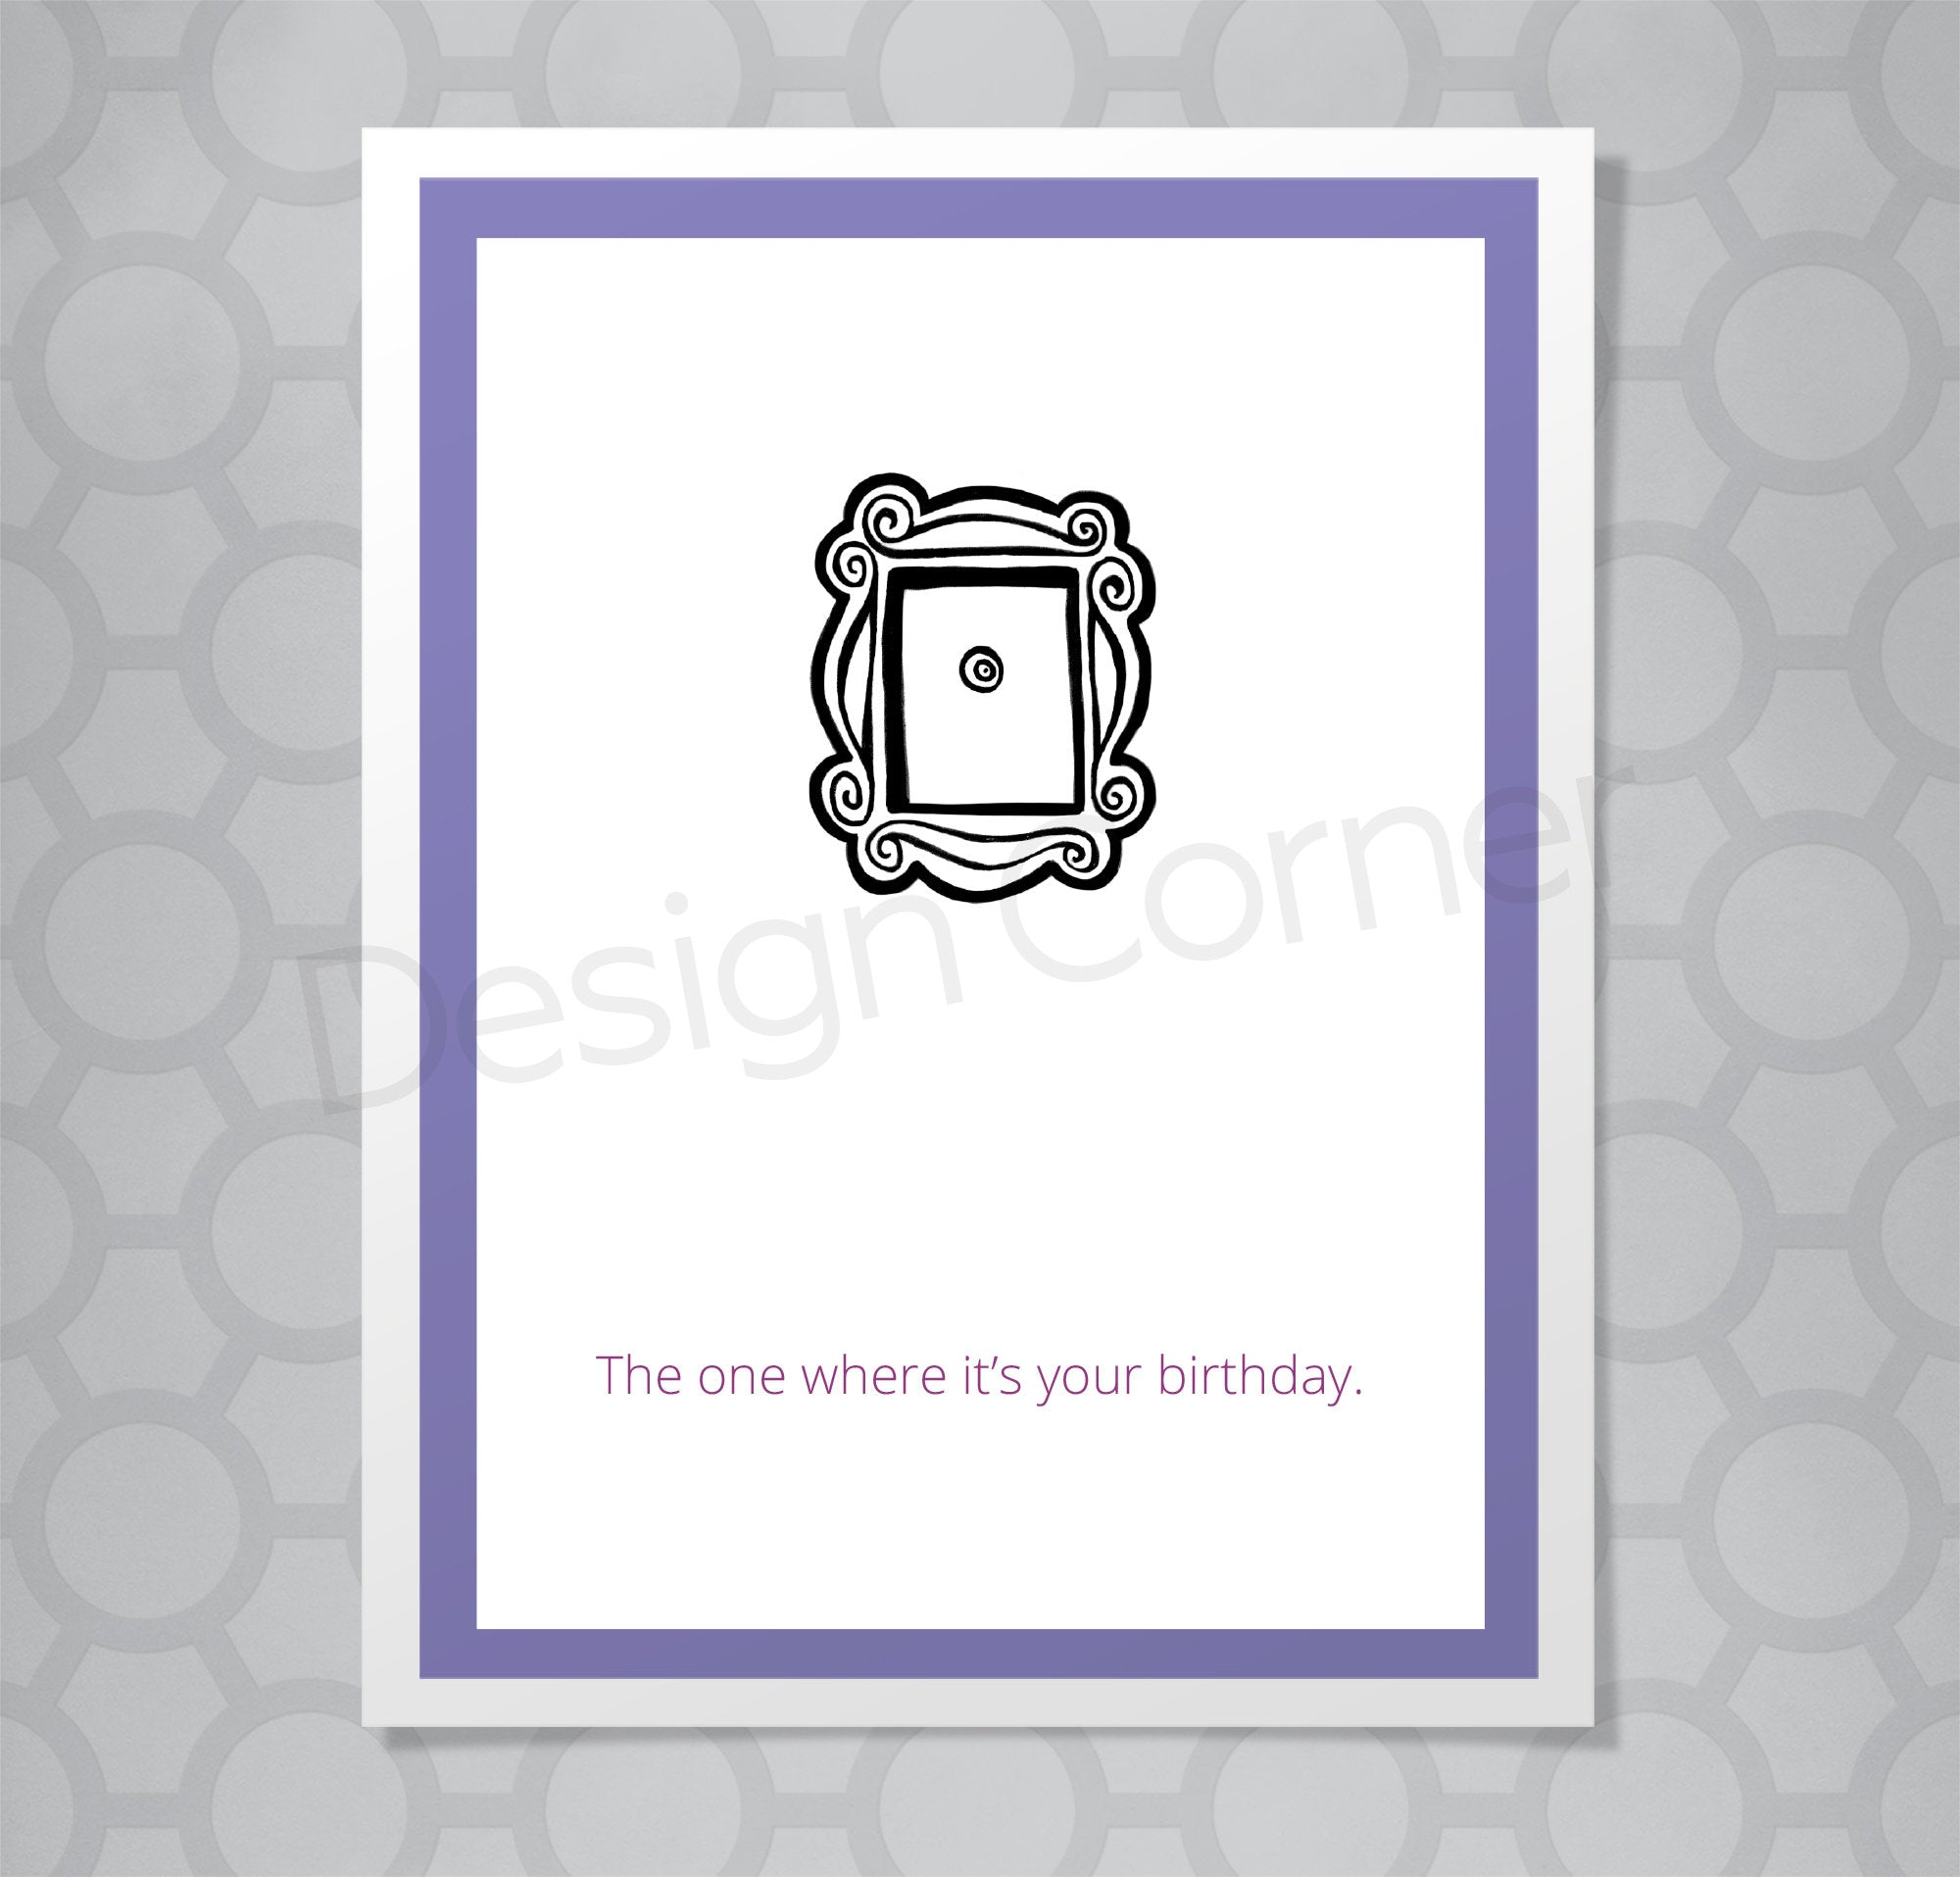 Greeting card with illustration of Friends show front door apartment frame. Caption says "The one where it's your birthday."